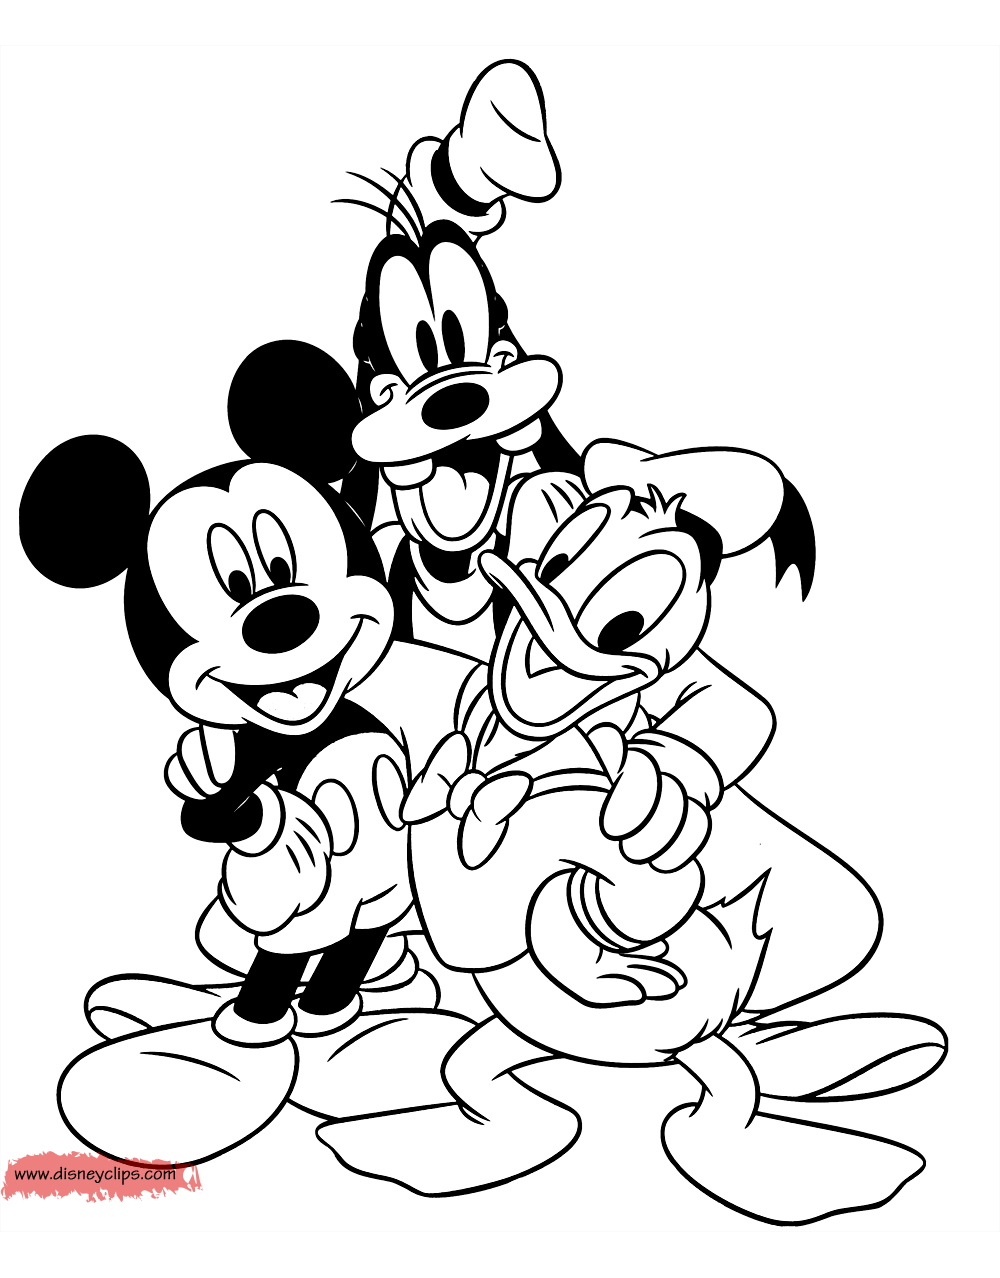 mickey mouse coloring page misc mickey mouse coloring pages 5 disneyclipscom mickey page mouse coloring 